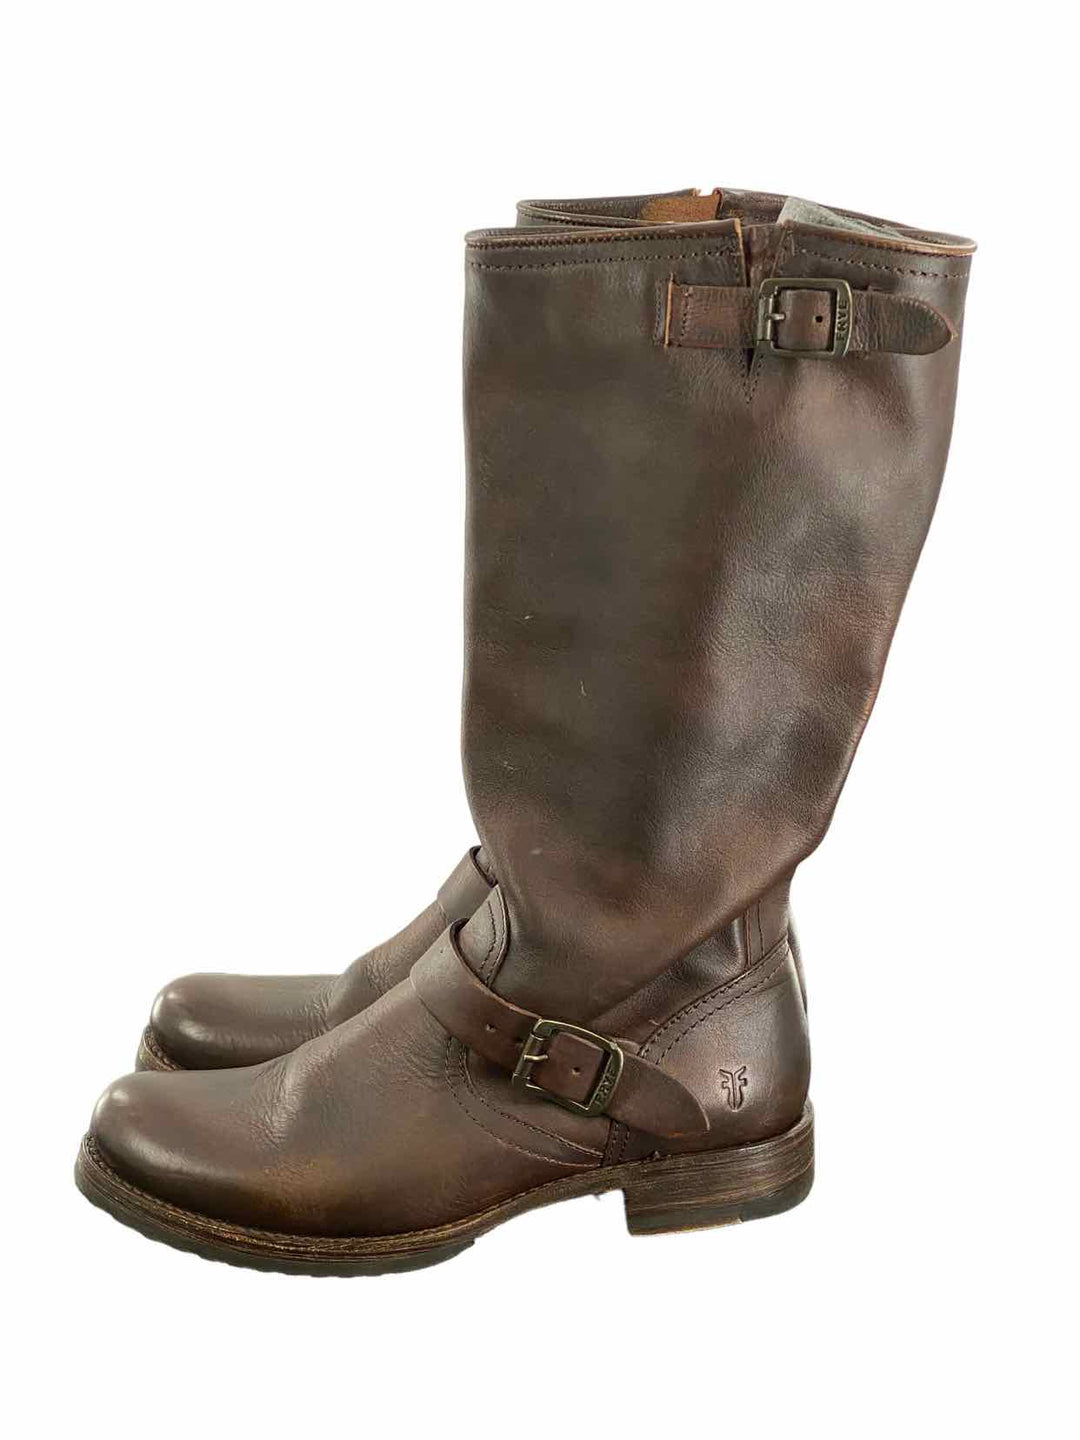 Frye Shoe Size 10 Brown Leather NWOT Boots(knee)